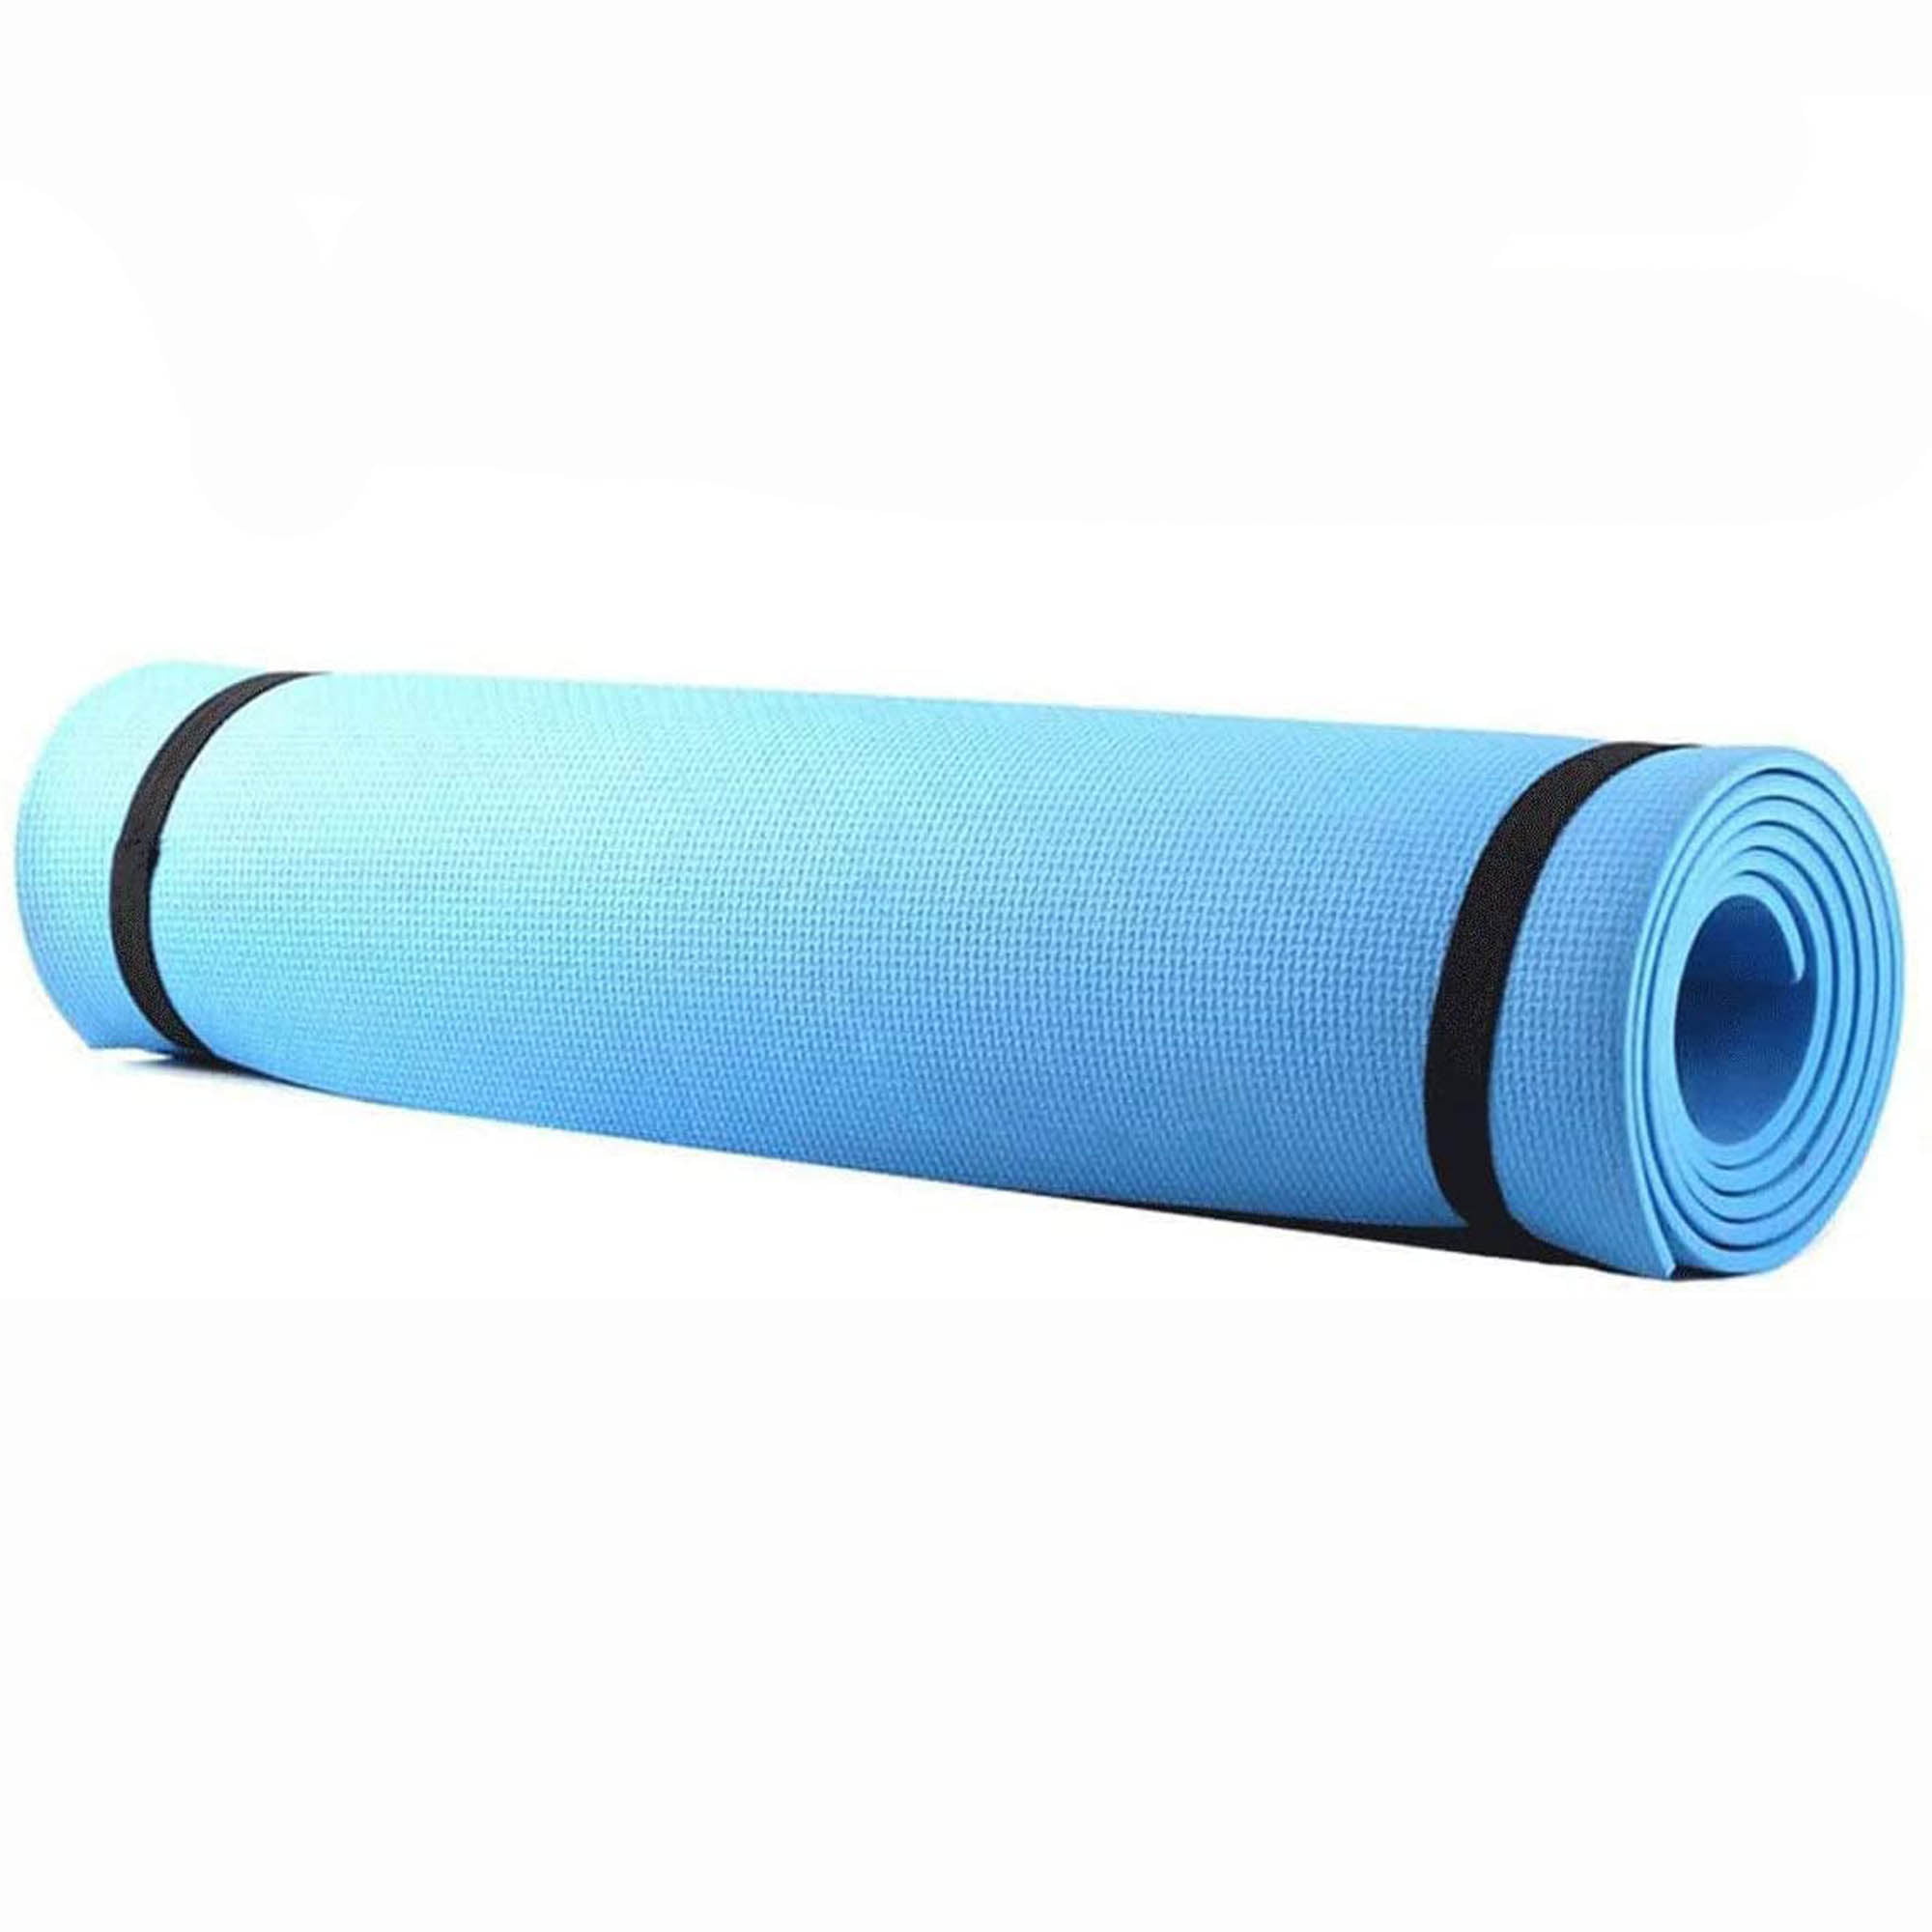 Large Non Slip Extra Thick Yoga Mat Exercise Pilates Gym Picnic Camping Straps 